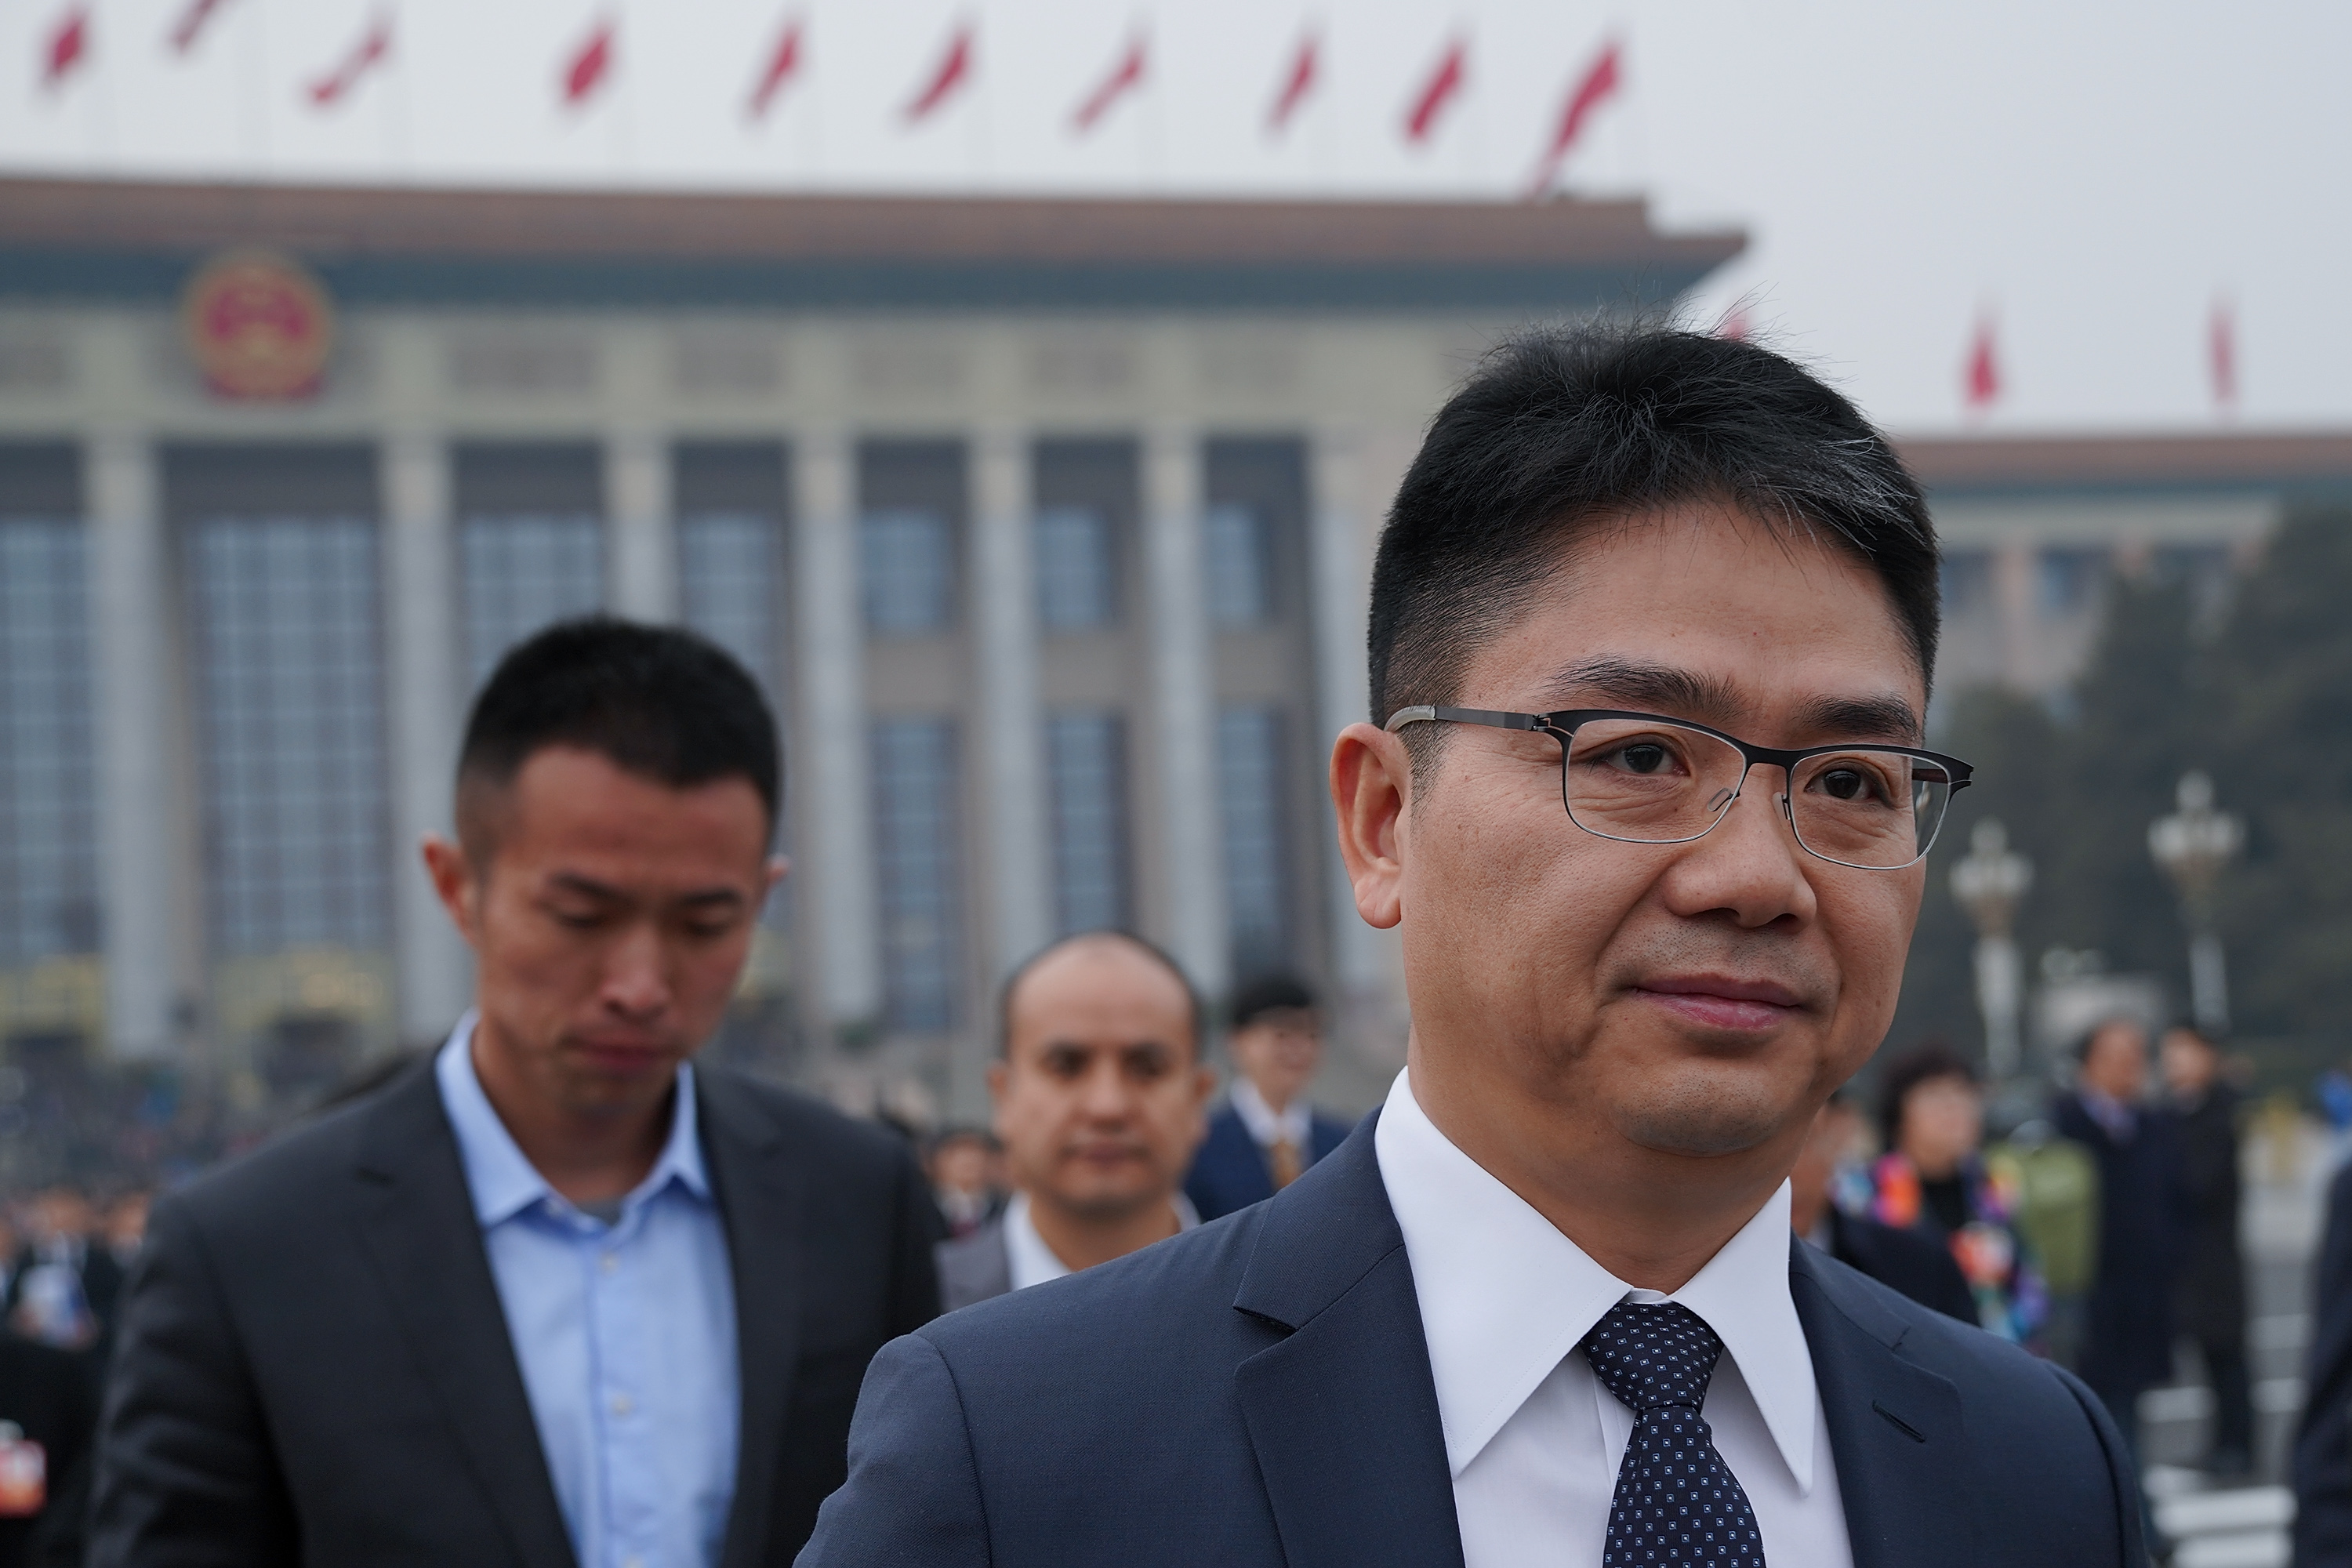 CEO of JD.com Richard Liu attends the opening ceremony of the Chinese People's Political Consultative Conference (CPPCC) on March 3, 2018 in Beijing, China. (Lintao Zhang&mdash;Getty Images)